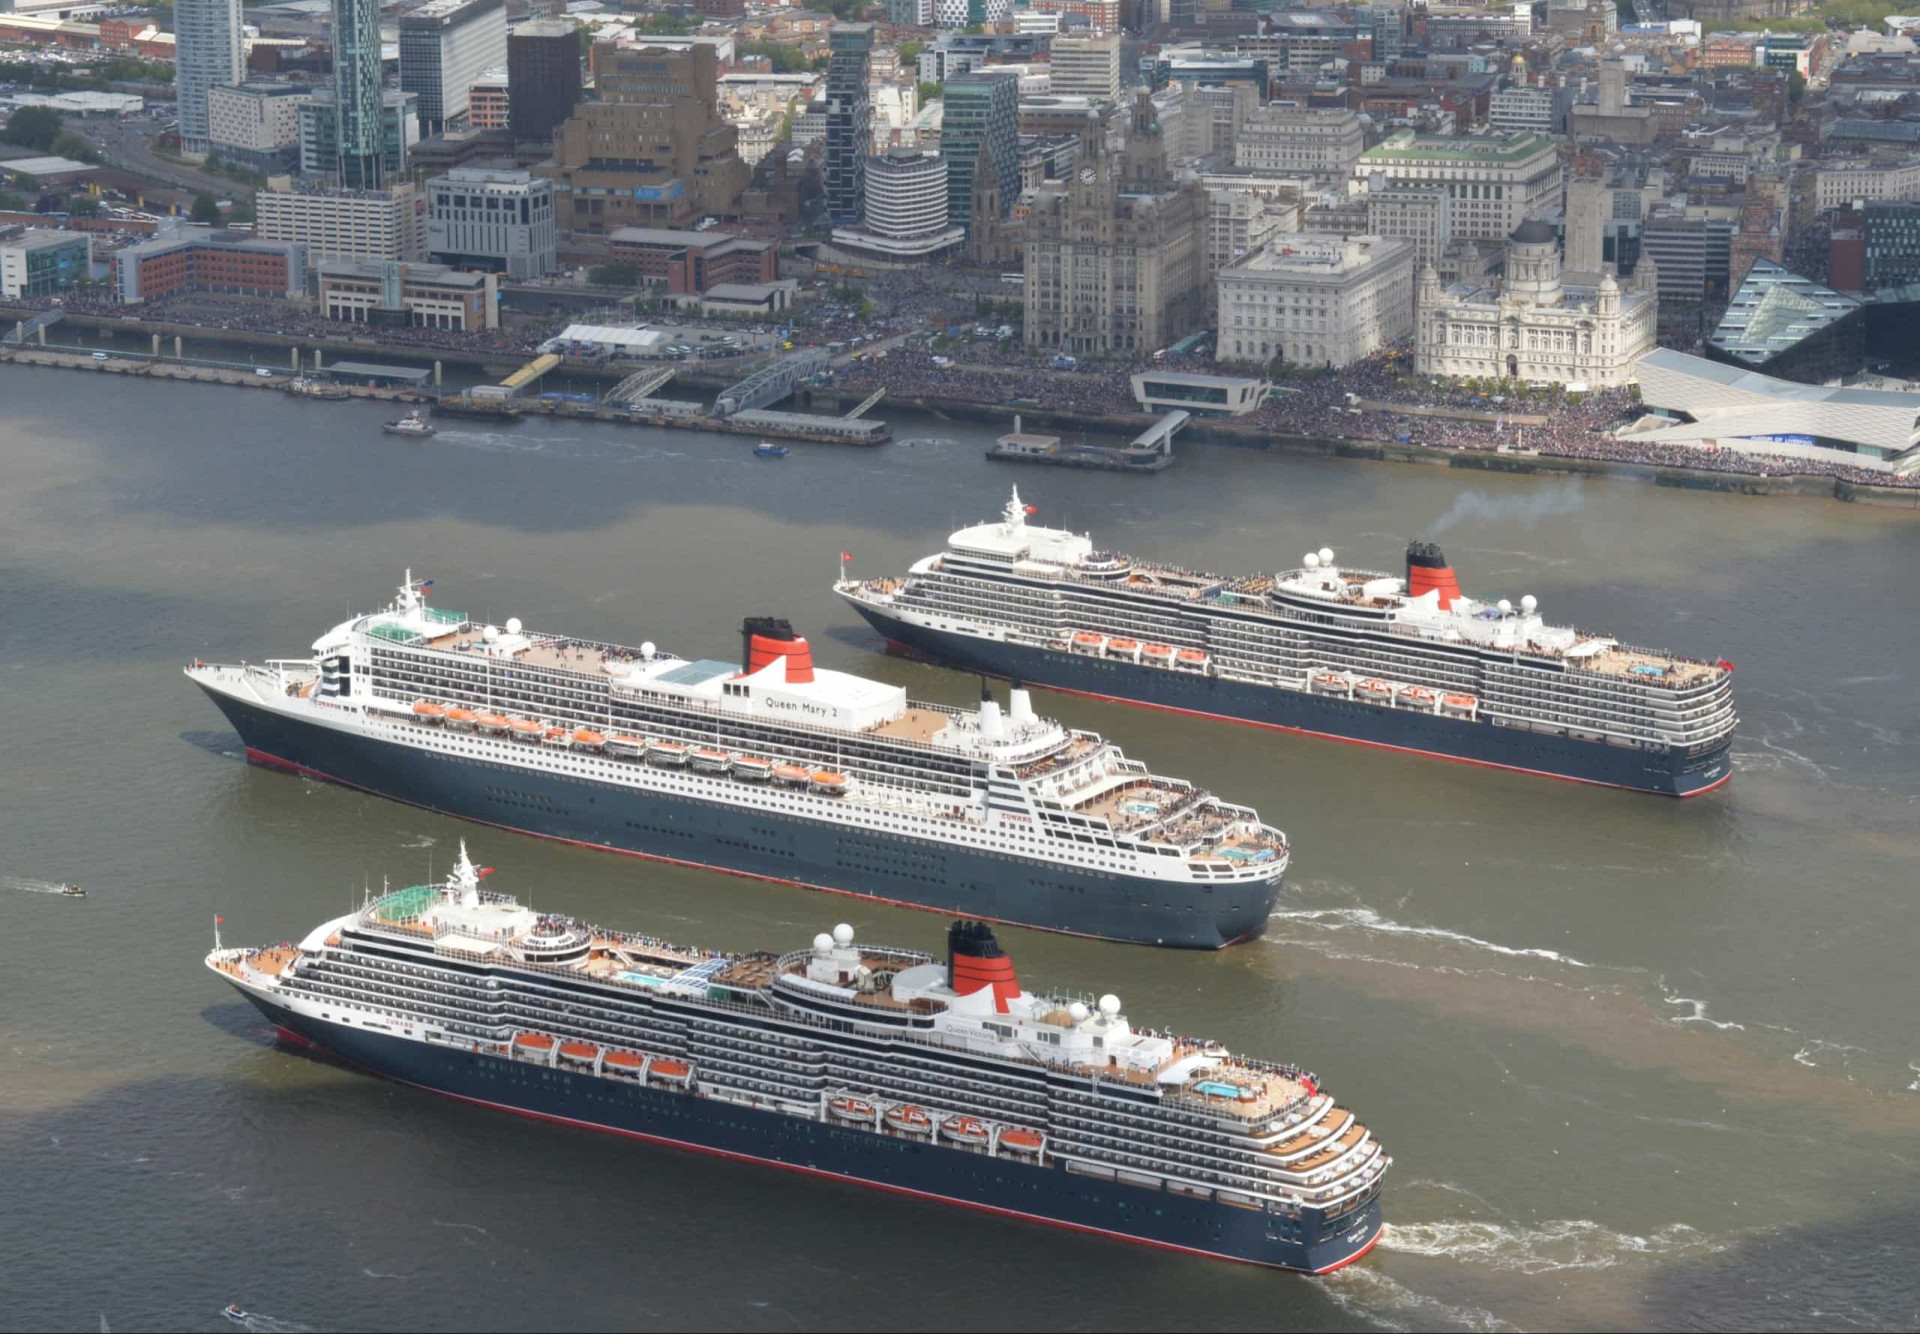 <p>In 2015, Cunard's three Queens met on the River Mersey in Liverpool to celebrate the company's 175th anniversary—MS <em>Queen Mary 2</em>, MS <em>Queen Victoria</em>, and MS <em>Queen Elizabeth.</em></p><p>You may also like:<a href="https://www.starsinsider.com/n/495355?utm_source=msn.com&utm_medium=display&utm_campaign=referral_description&utm_content=502910v1en-ae"> History's most celebrated military commanders</a></p>